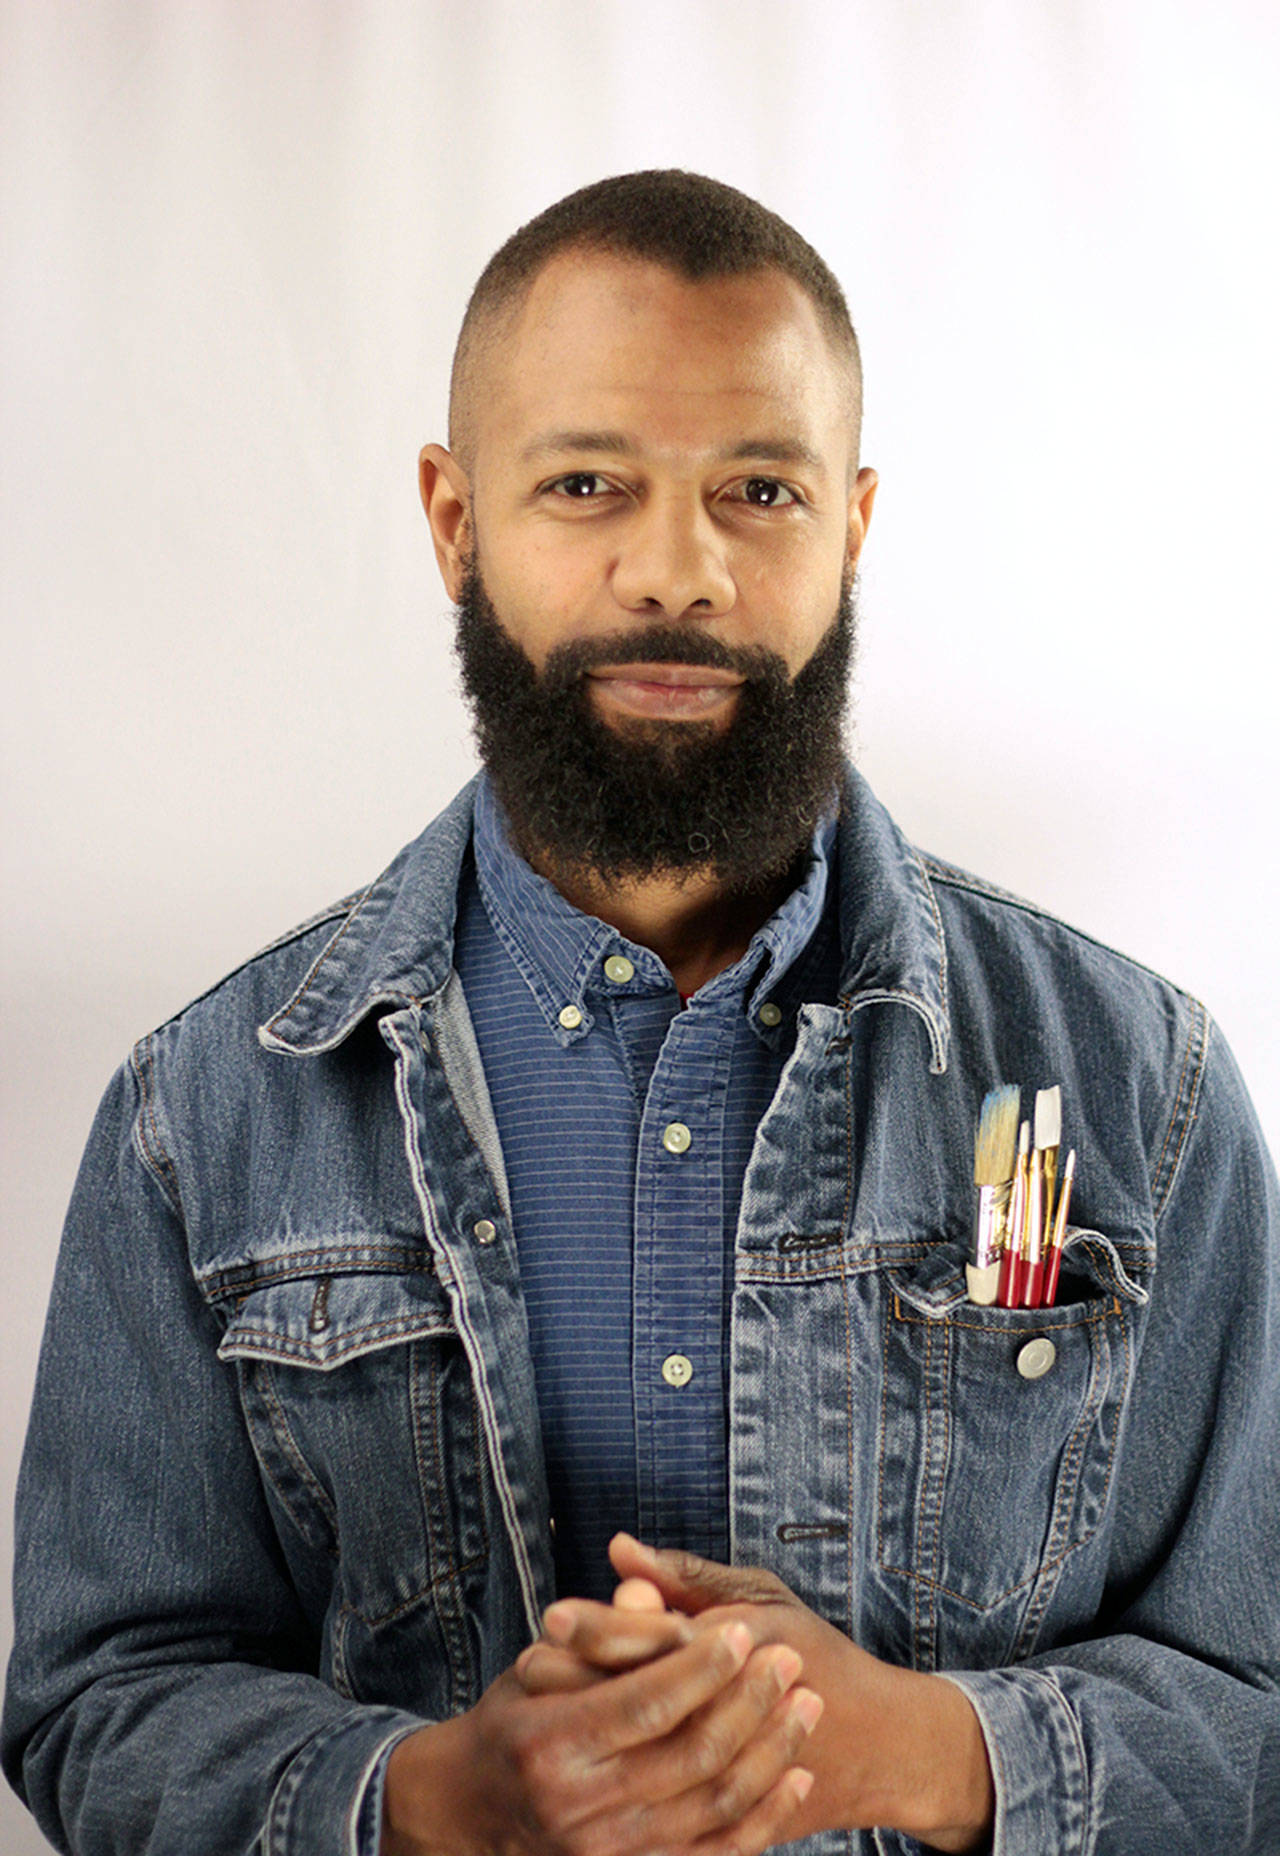 Author and artist Javaka Steptoe will lead librarygoers through an interactive art workshop at the Port Angeles Library on Thursday evening. (Javaka Steptoe)